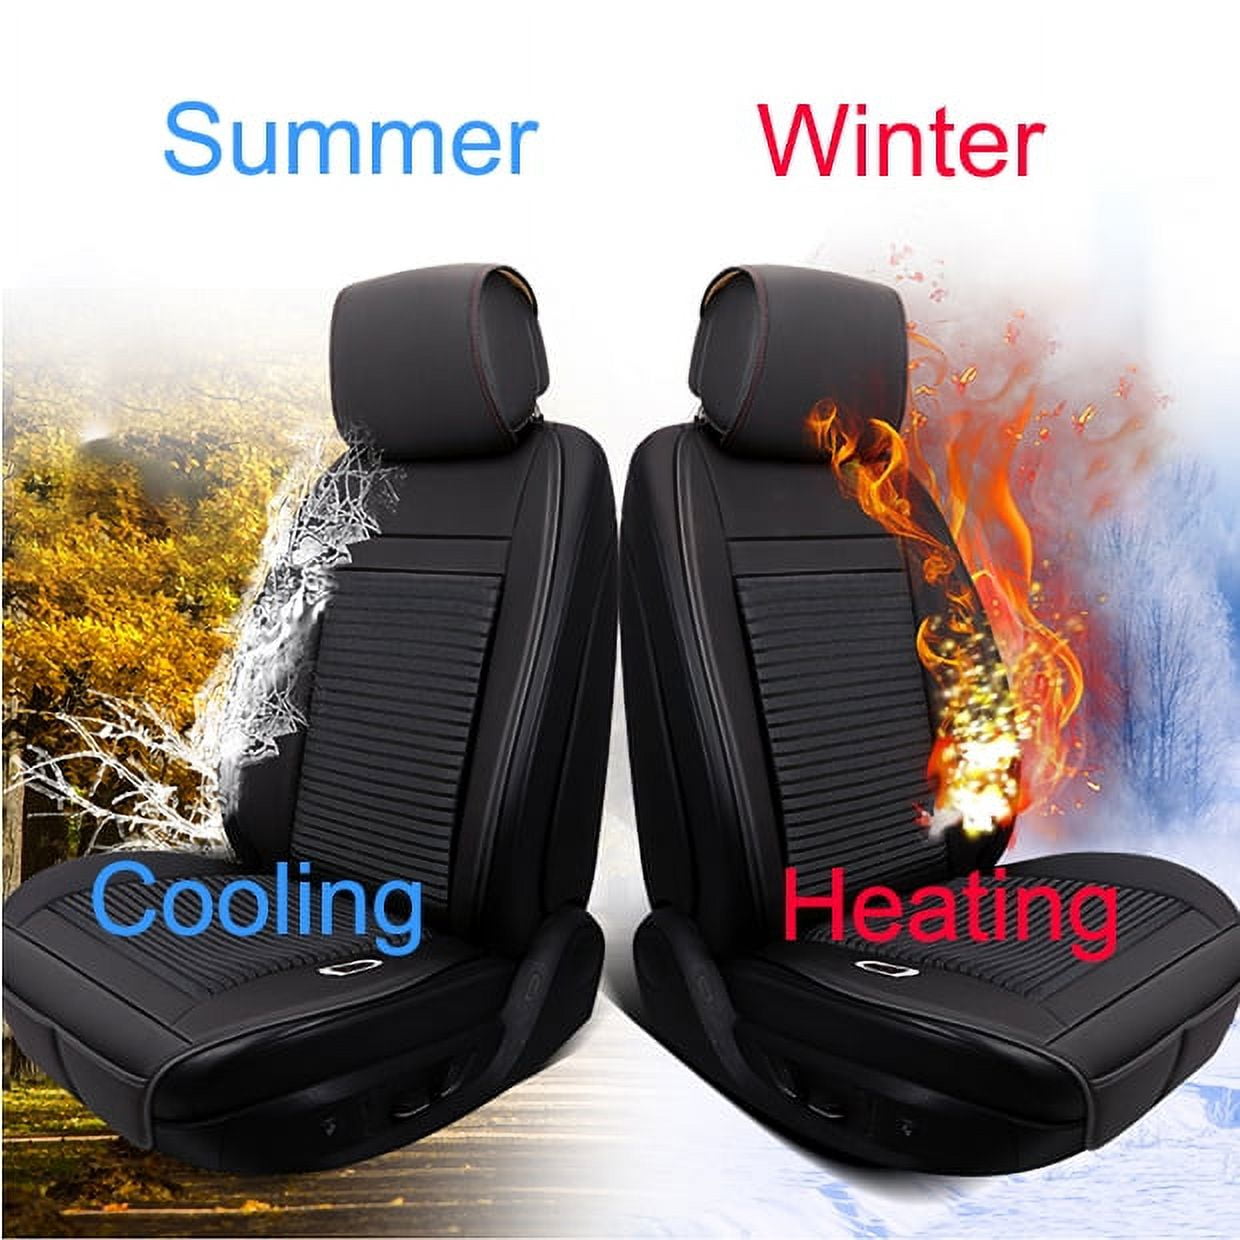 Massage 3 In1 Car Seat Cushion Cooling Warm Heated Chair Cover W